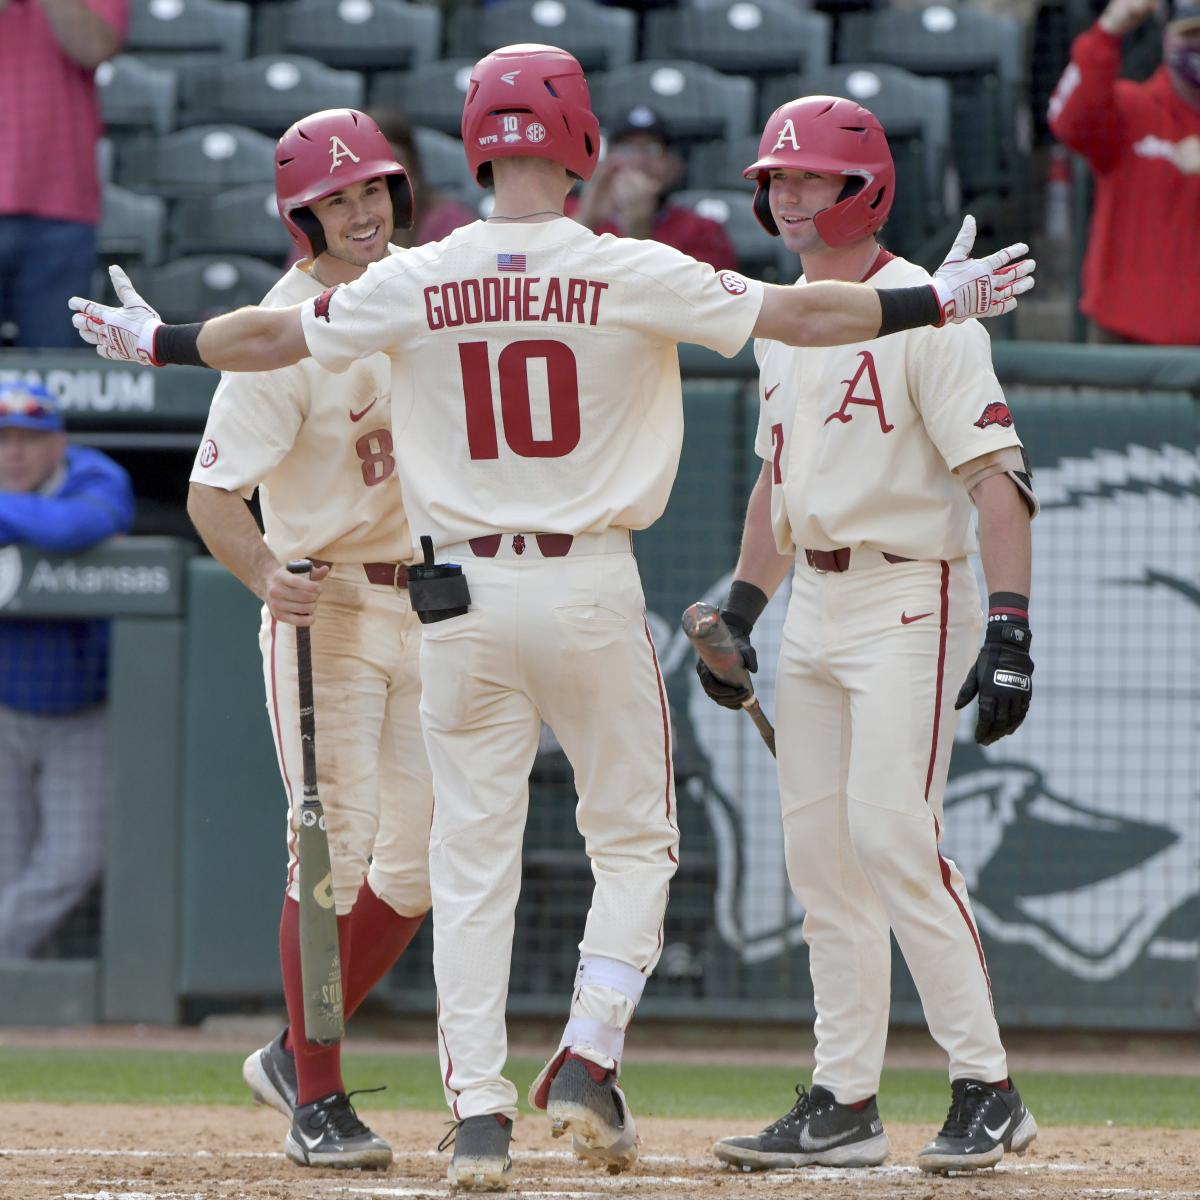 NCAA Baseball Rankings 2021 Latest Top 25 D1 RPI, Team Records and